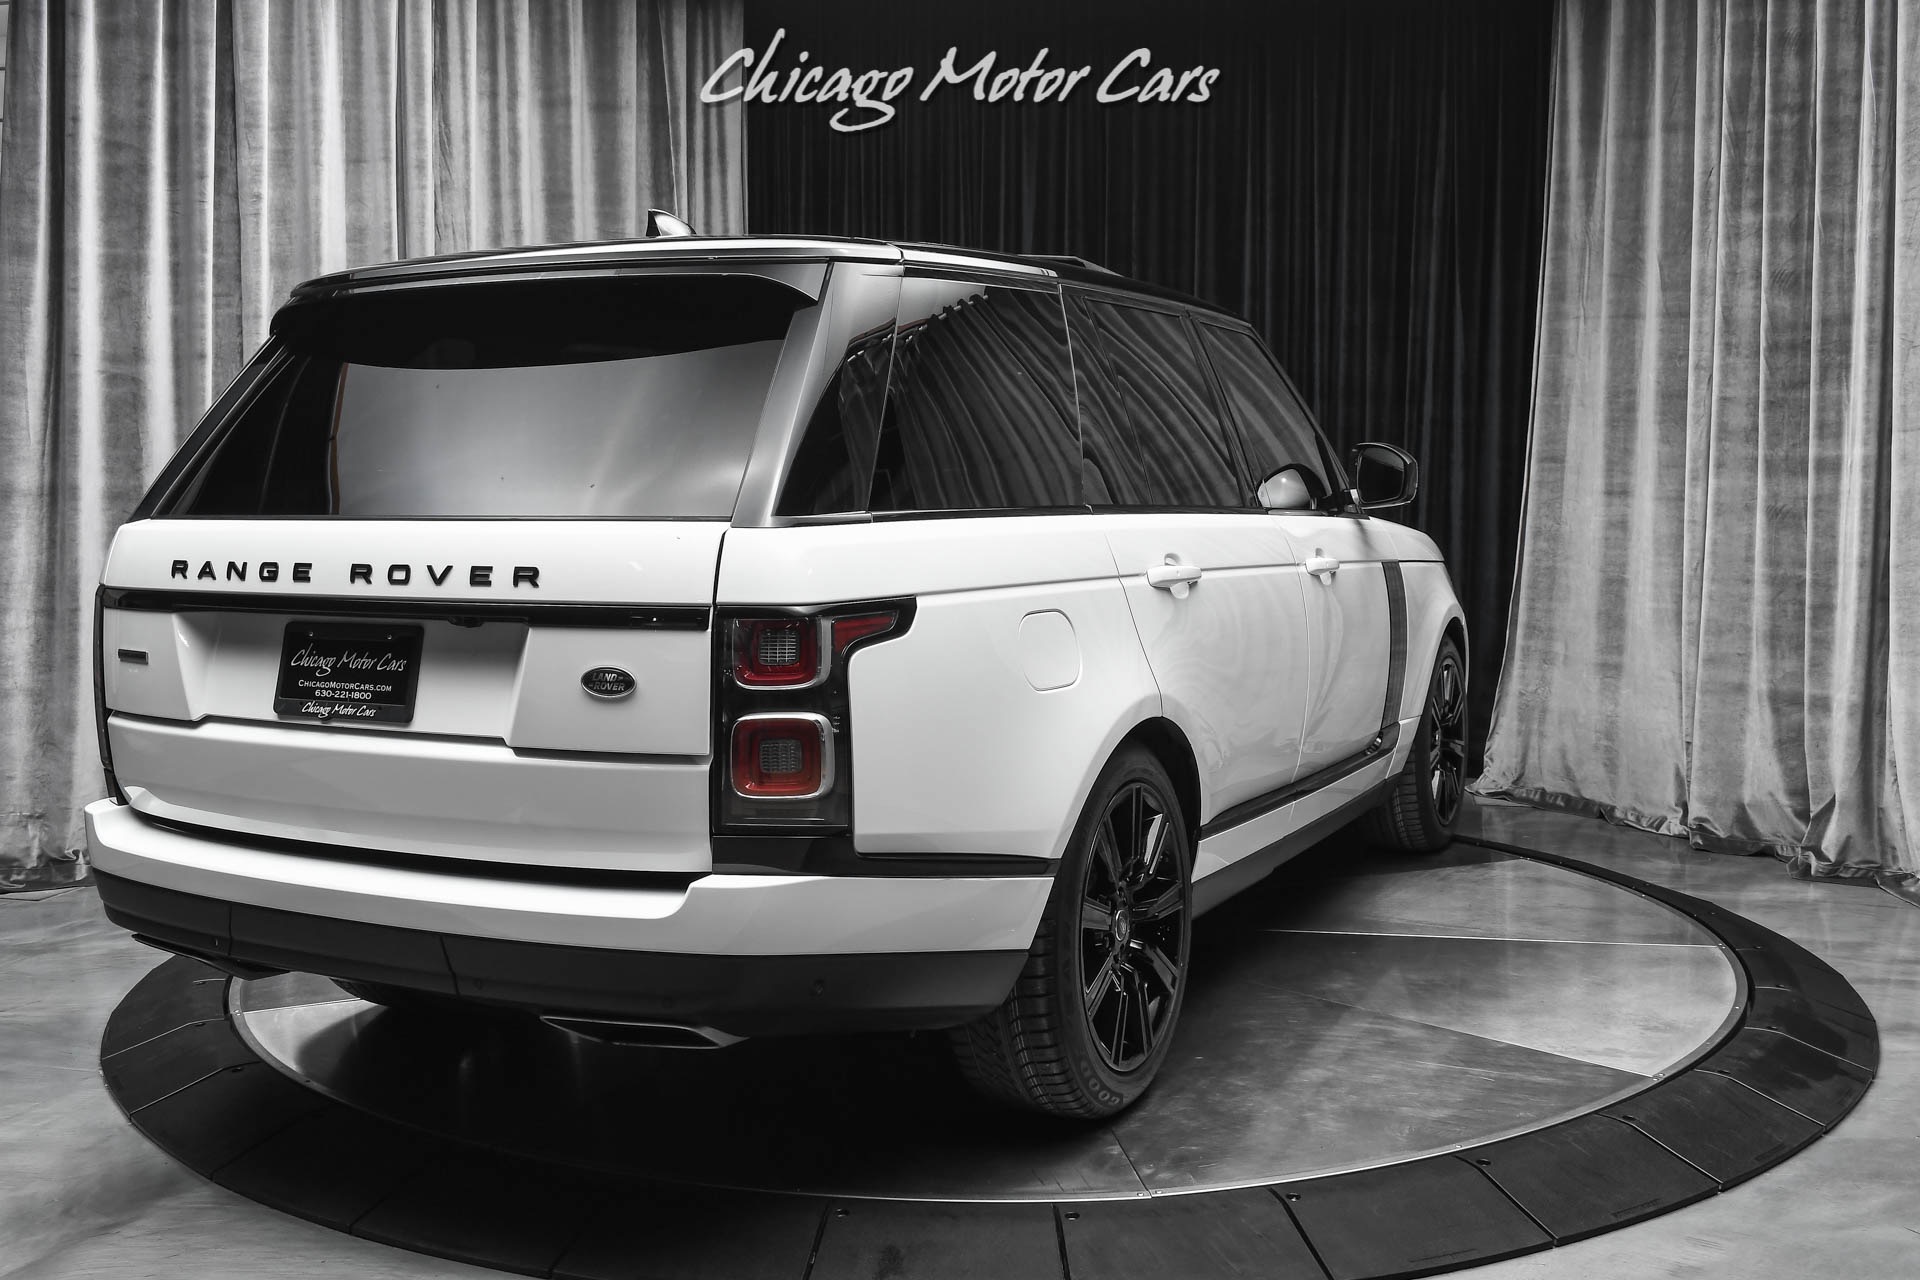 Used-2019-Land-Rover-Range-Rover-Supercharged-118kMSRP-Vision-Assist-Package-Loaded